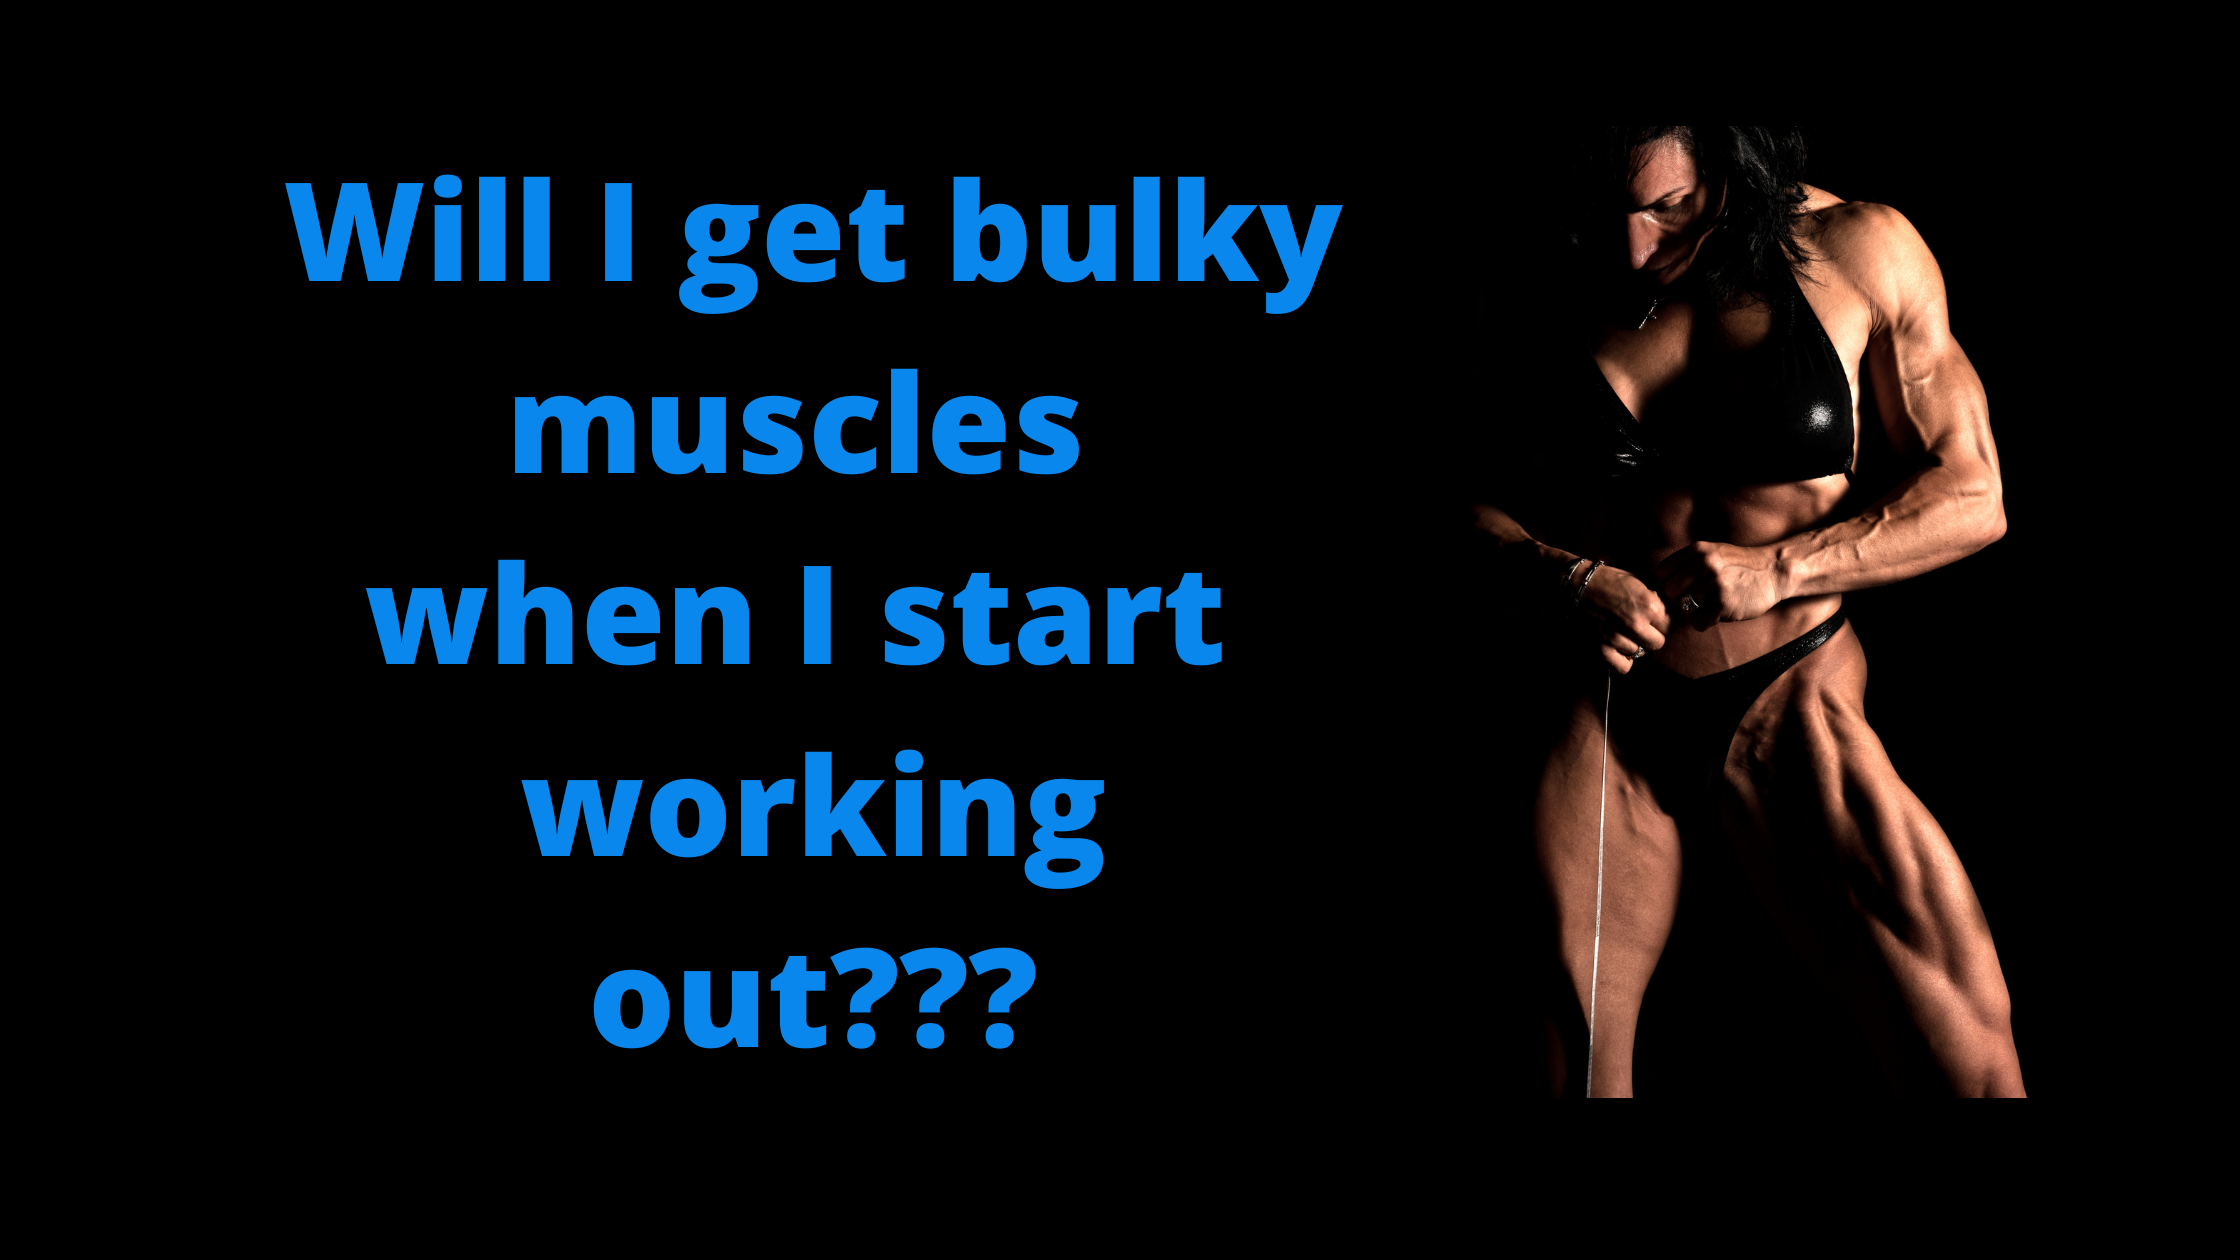 Will My Muscles Get Too Big If I Start Lifting Weights?